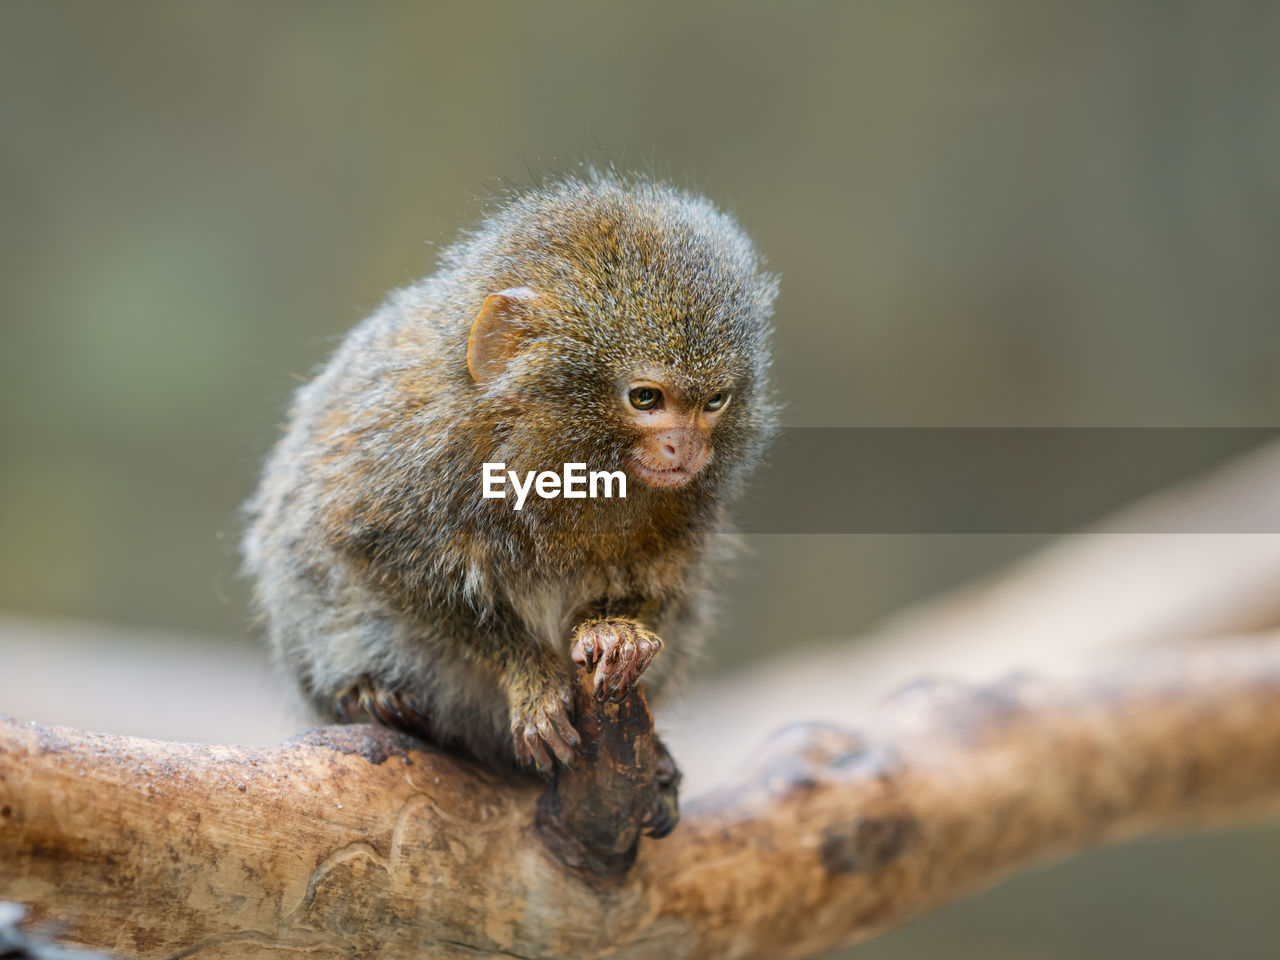 animal themes, animal, animal wildlife, mammal, one animal, wildlife, monkey, marmoset, new world monkey, primate, close-up, macaque, tree, no people, sitting, nature, branch, outdoors, cute, day, portrait, focus on foreground